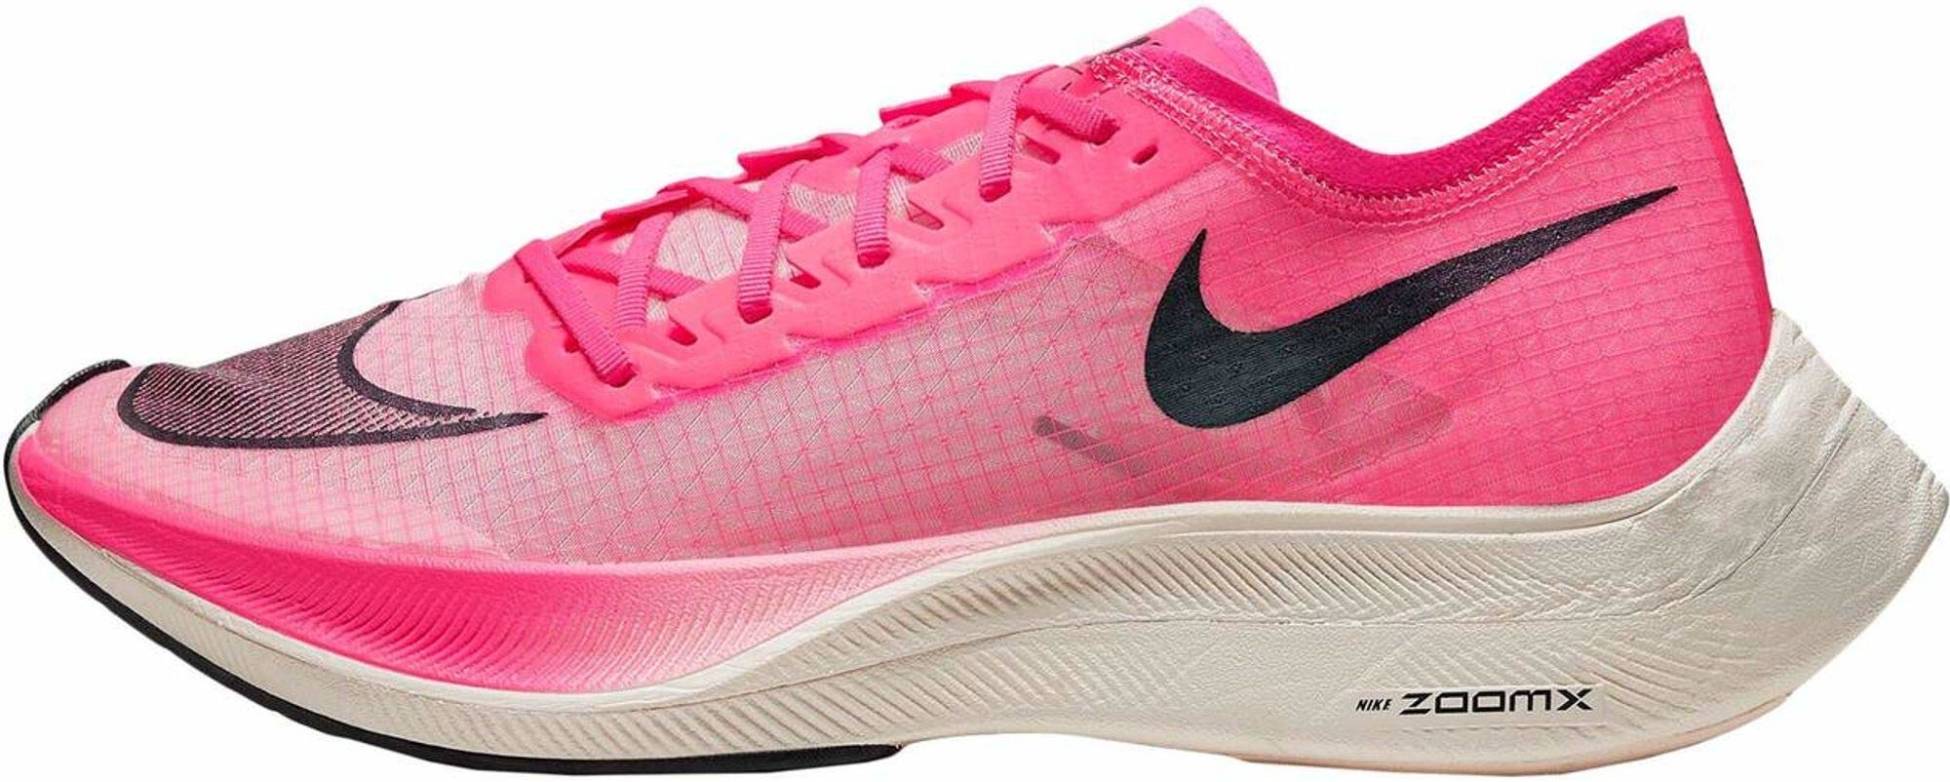 pink nike shoes with writing on them